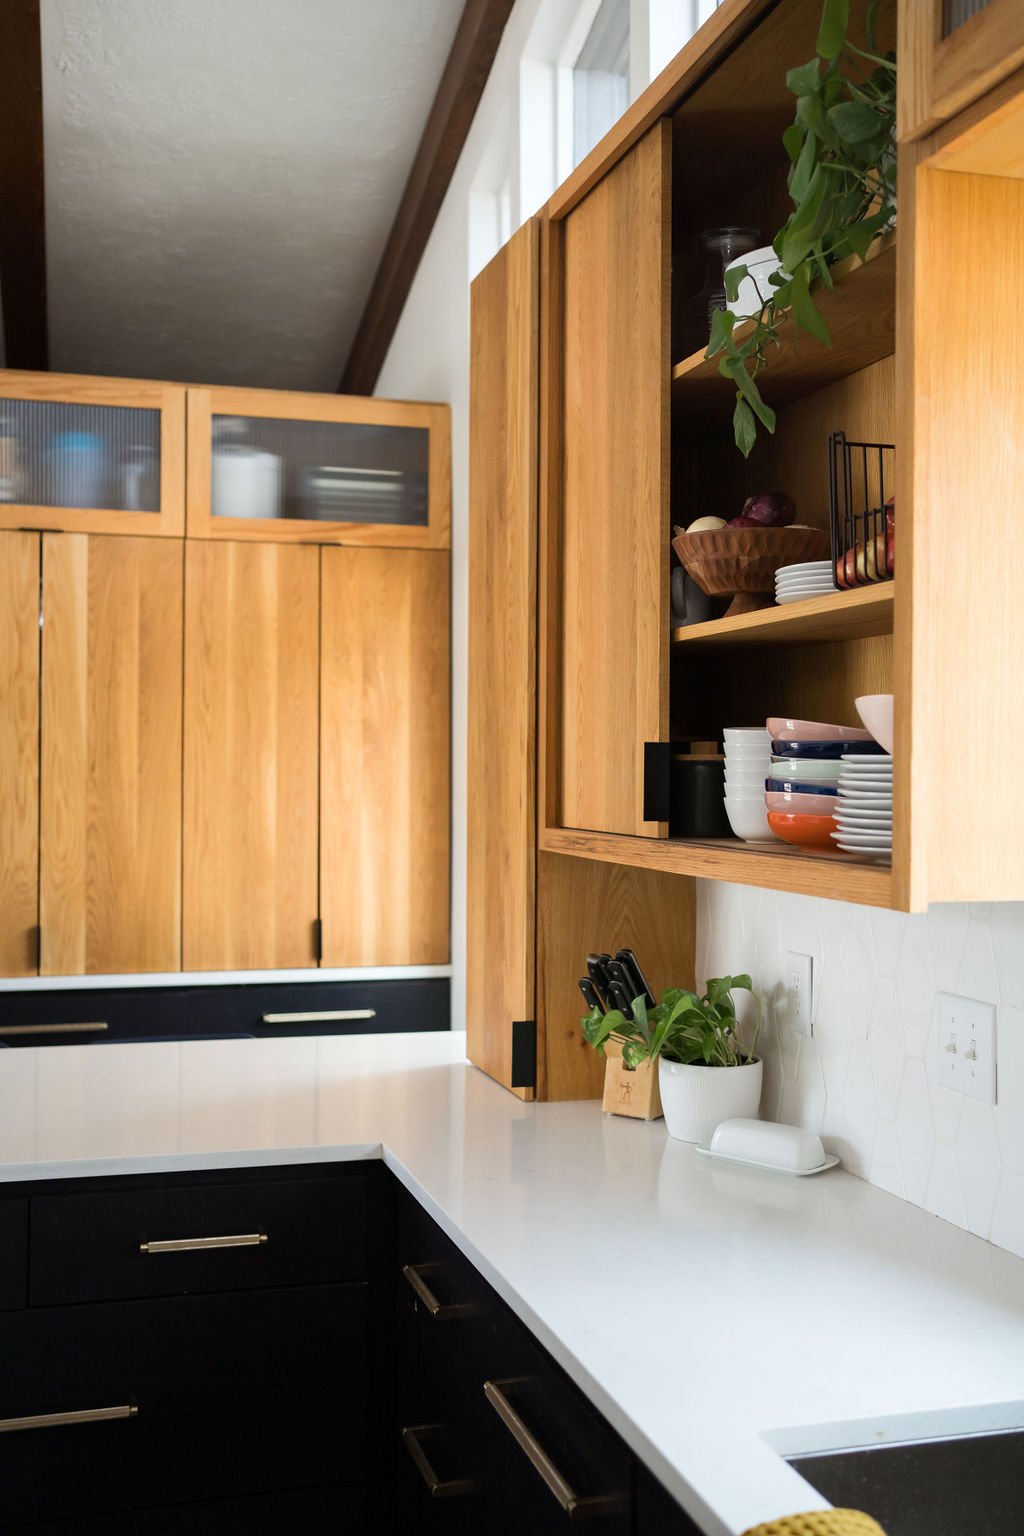 Wood upper cabinets and black lower cabinets with white countertops in a mid-century modern kitchen remodel.